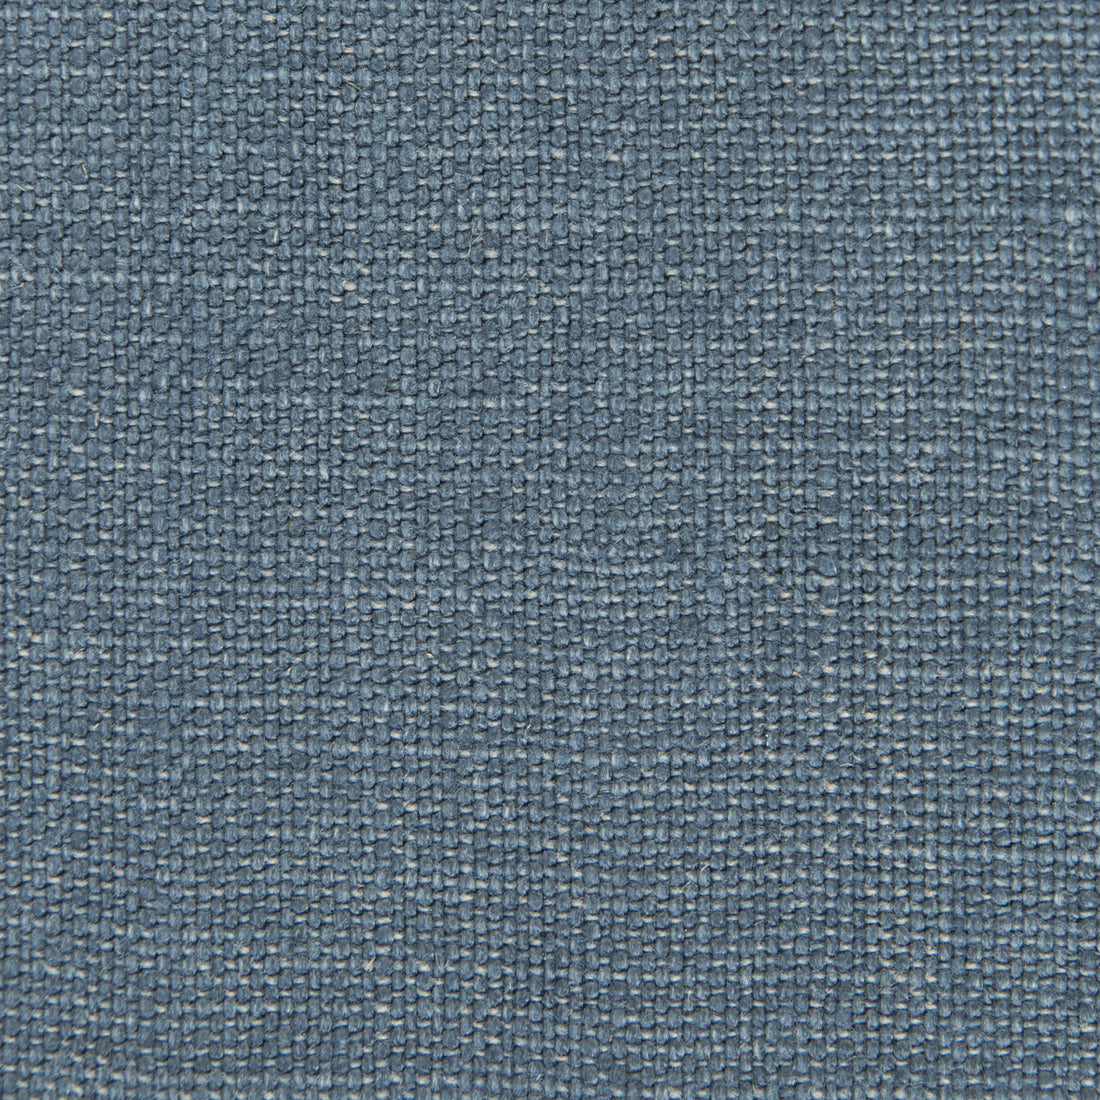 Nicaragua fabric in azul color - pattern GDT5239.014.0 - by Gaston y Daniela in the Basics collection